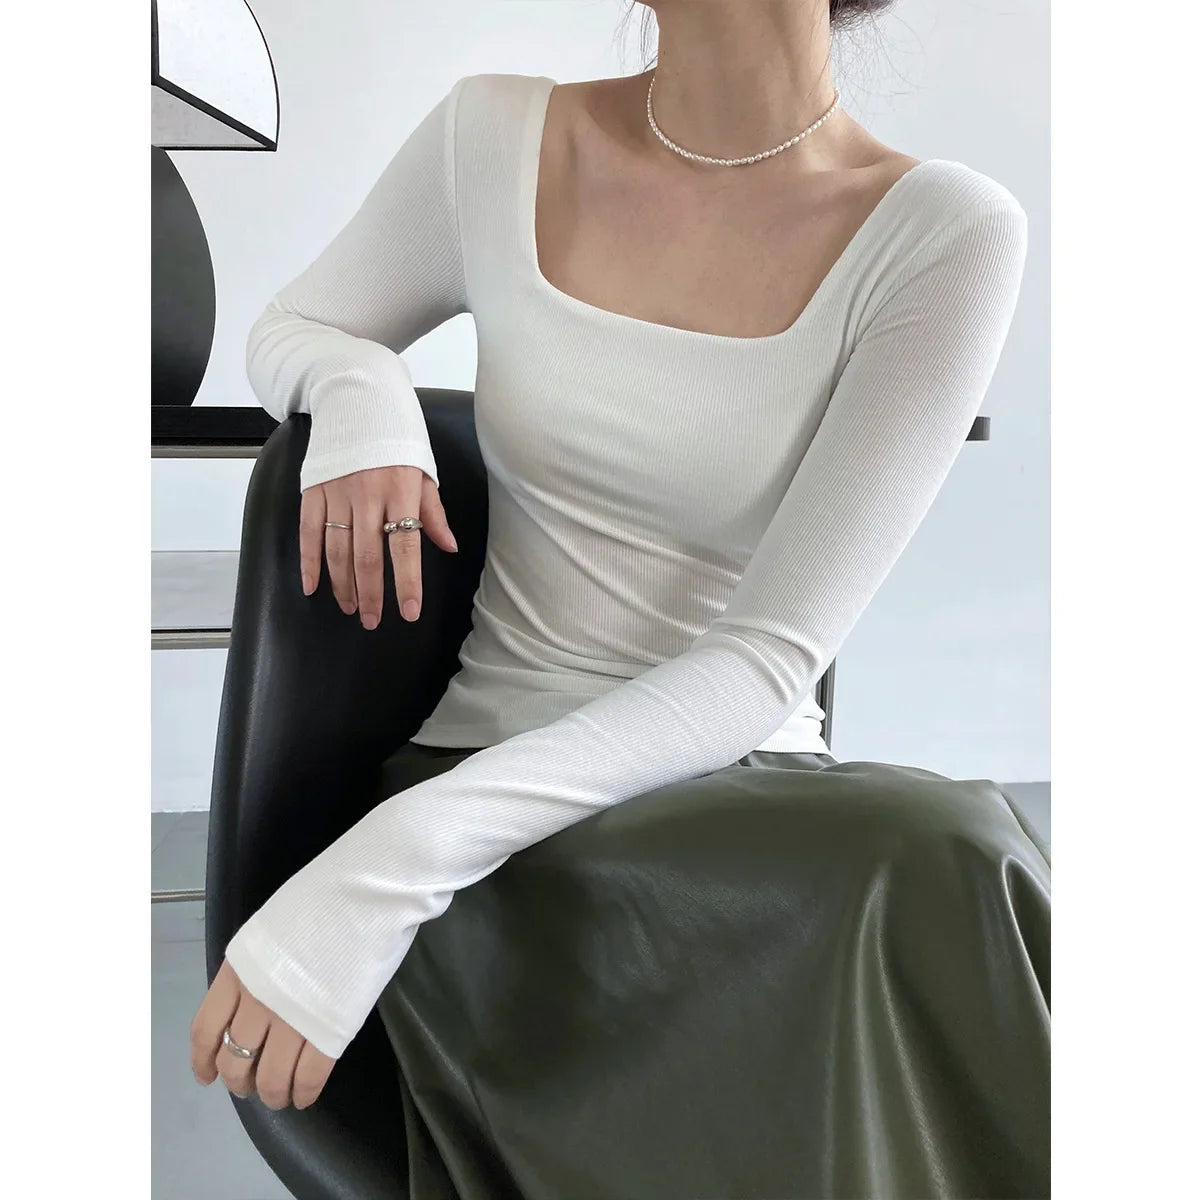 Women's Long-Sleeve Stretchy T-Shirt Square-Neck Slim-Fit Exposed Collarbone Low-Neck Shirt